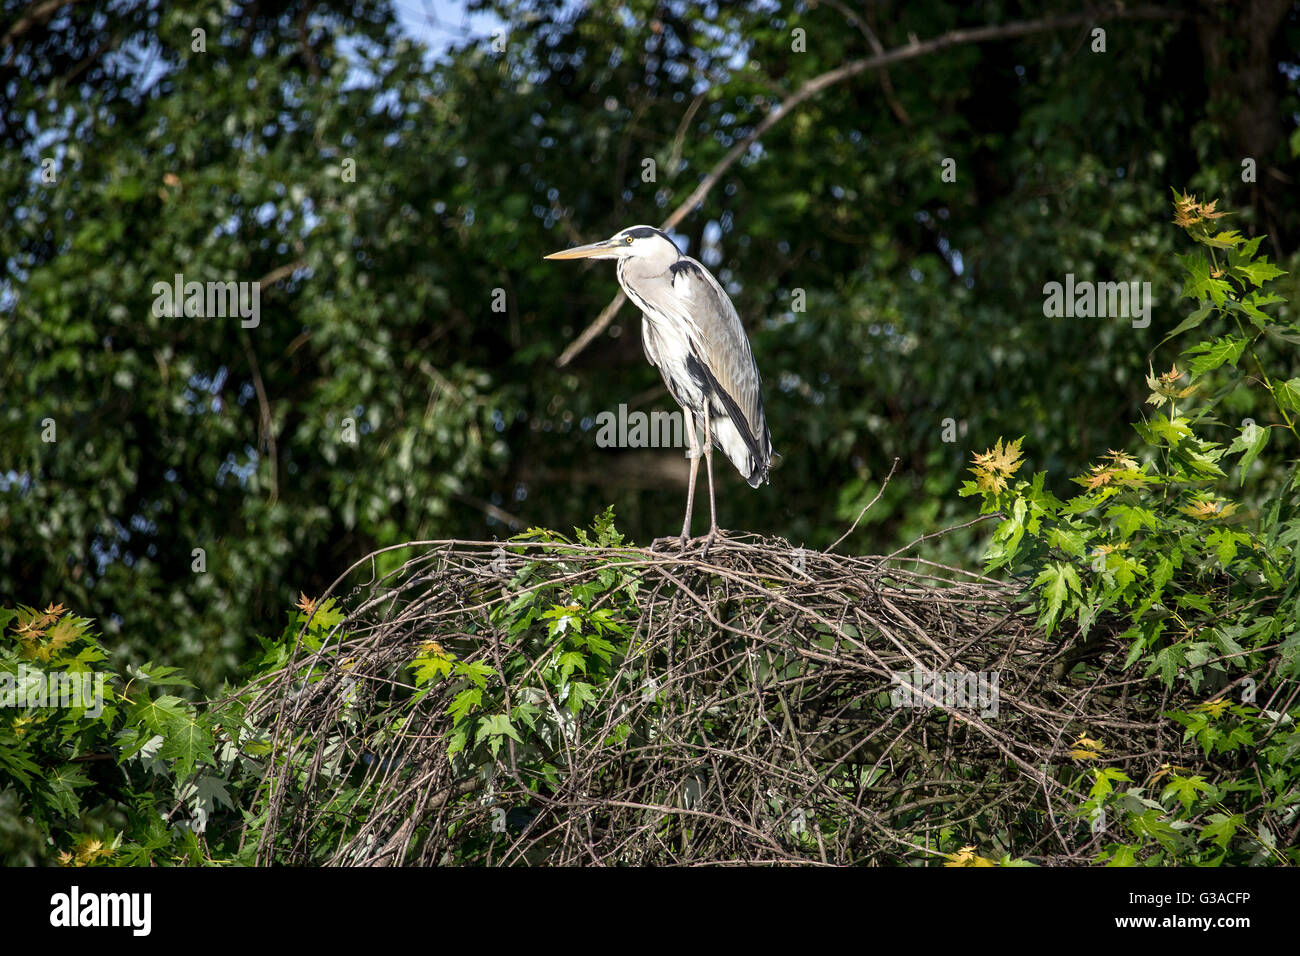 Danube, Serbia - Grey heron (Ardea cinerea) perched on a nest above the riverbank Stock Photo